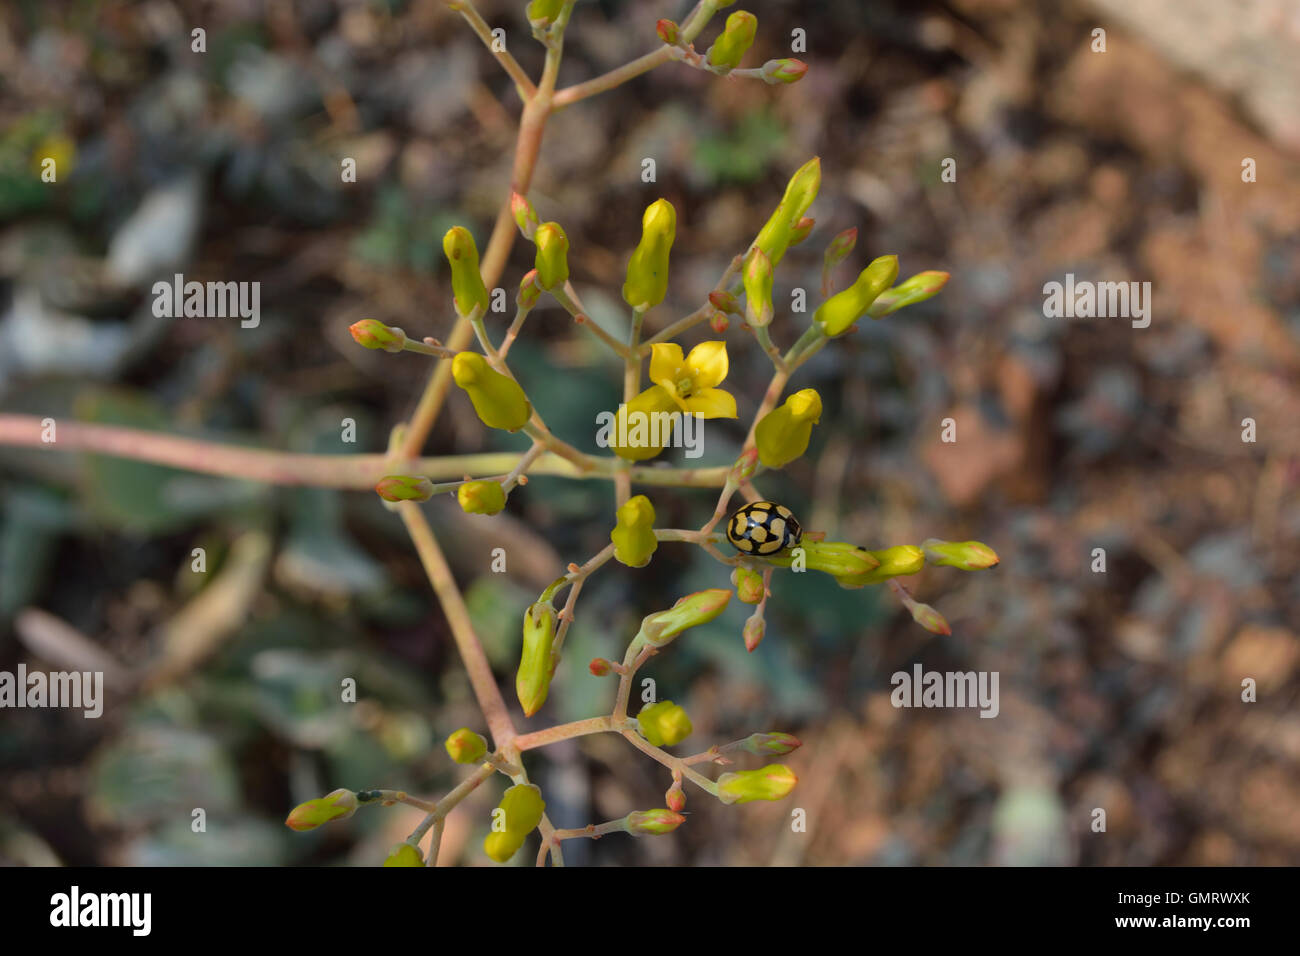 Yellow ladybird on cluster of tiny yellow flowers and buds Stock Photo